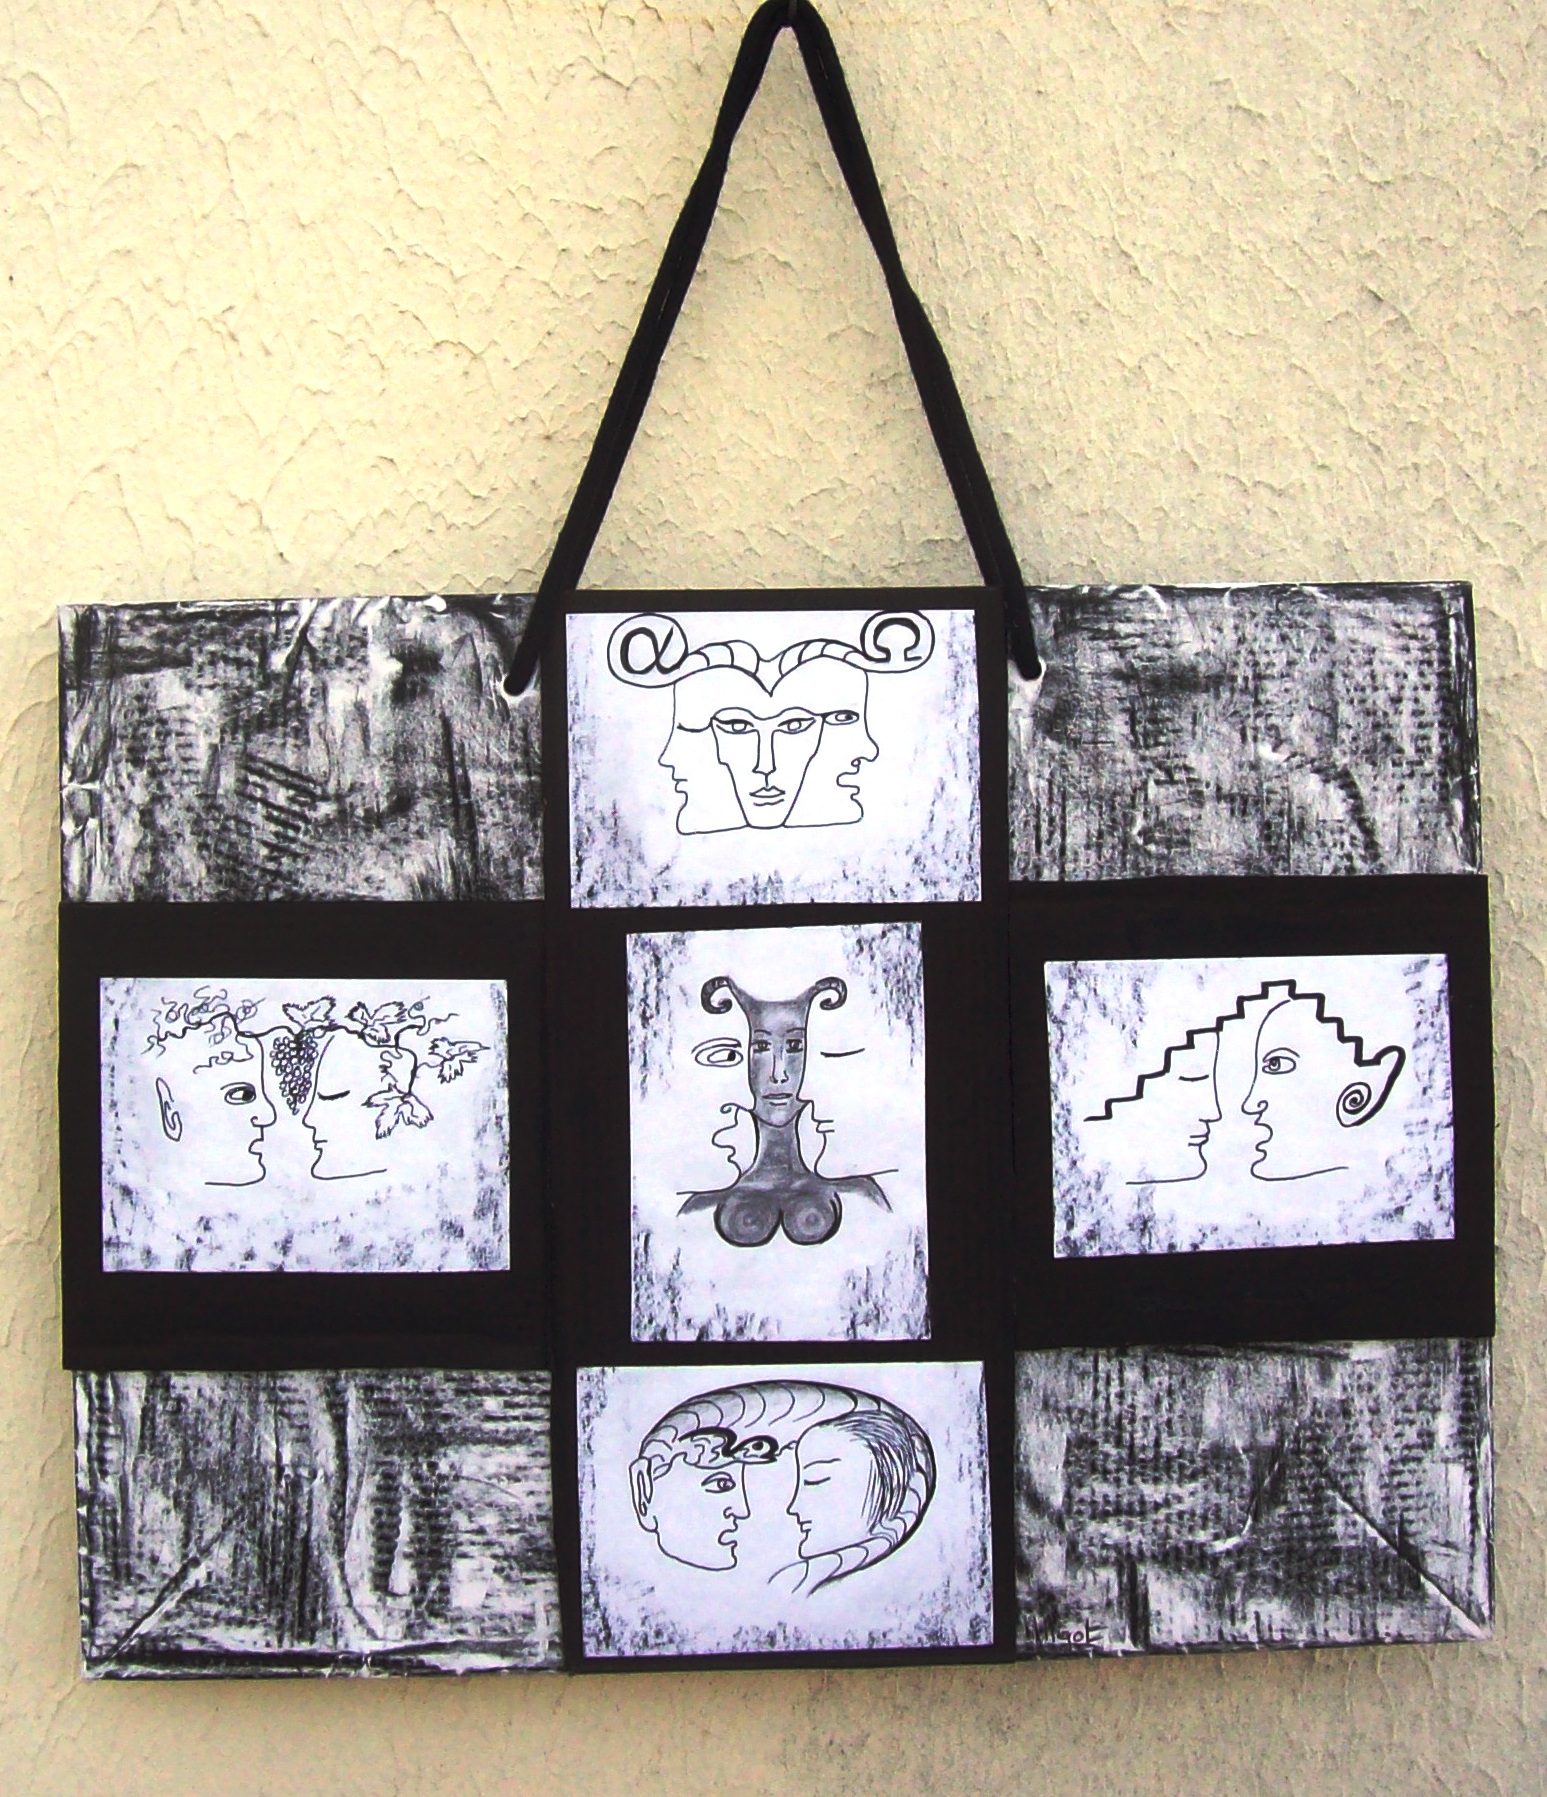 witchcraft-guerre-et-paix-war-and-peace-work-on-upcycling-bag-315-x-42-cm-mixed-media